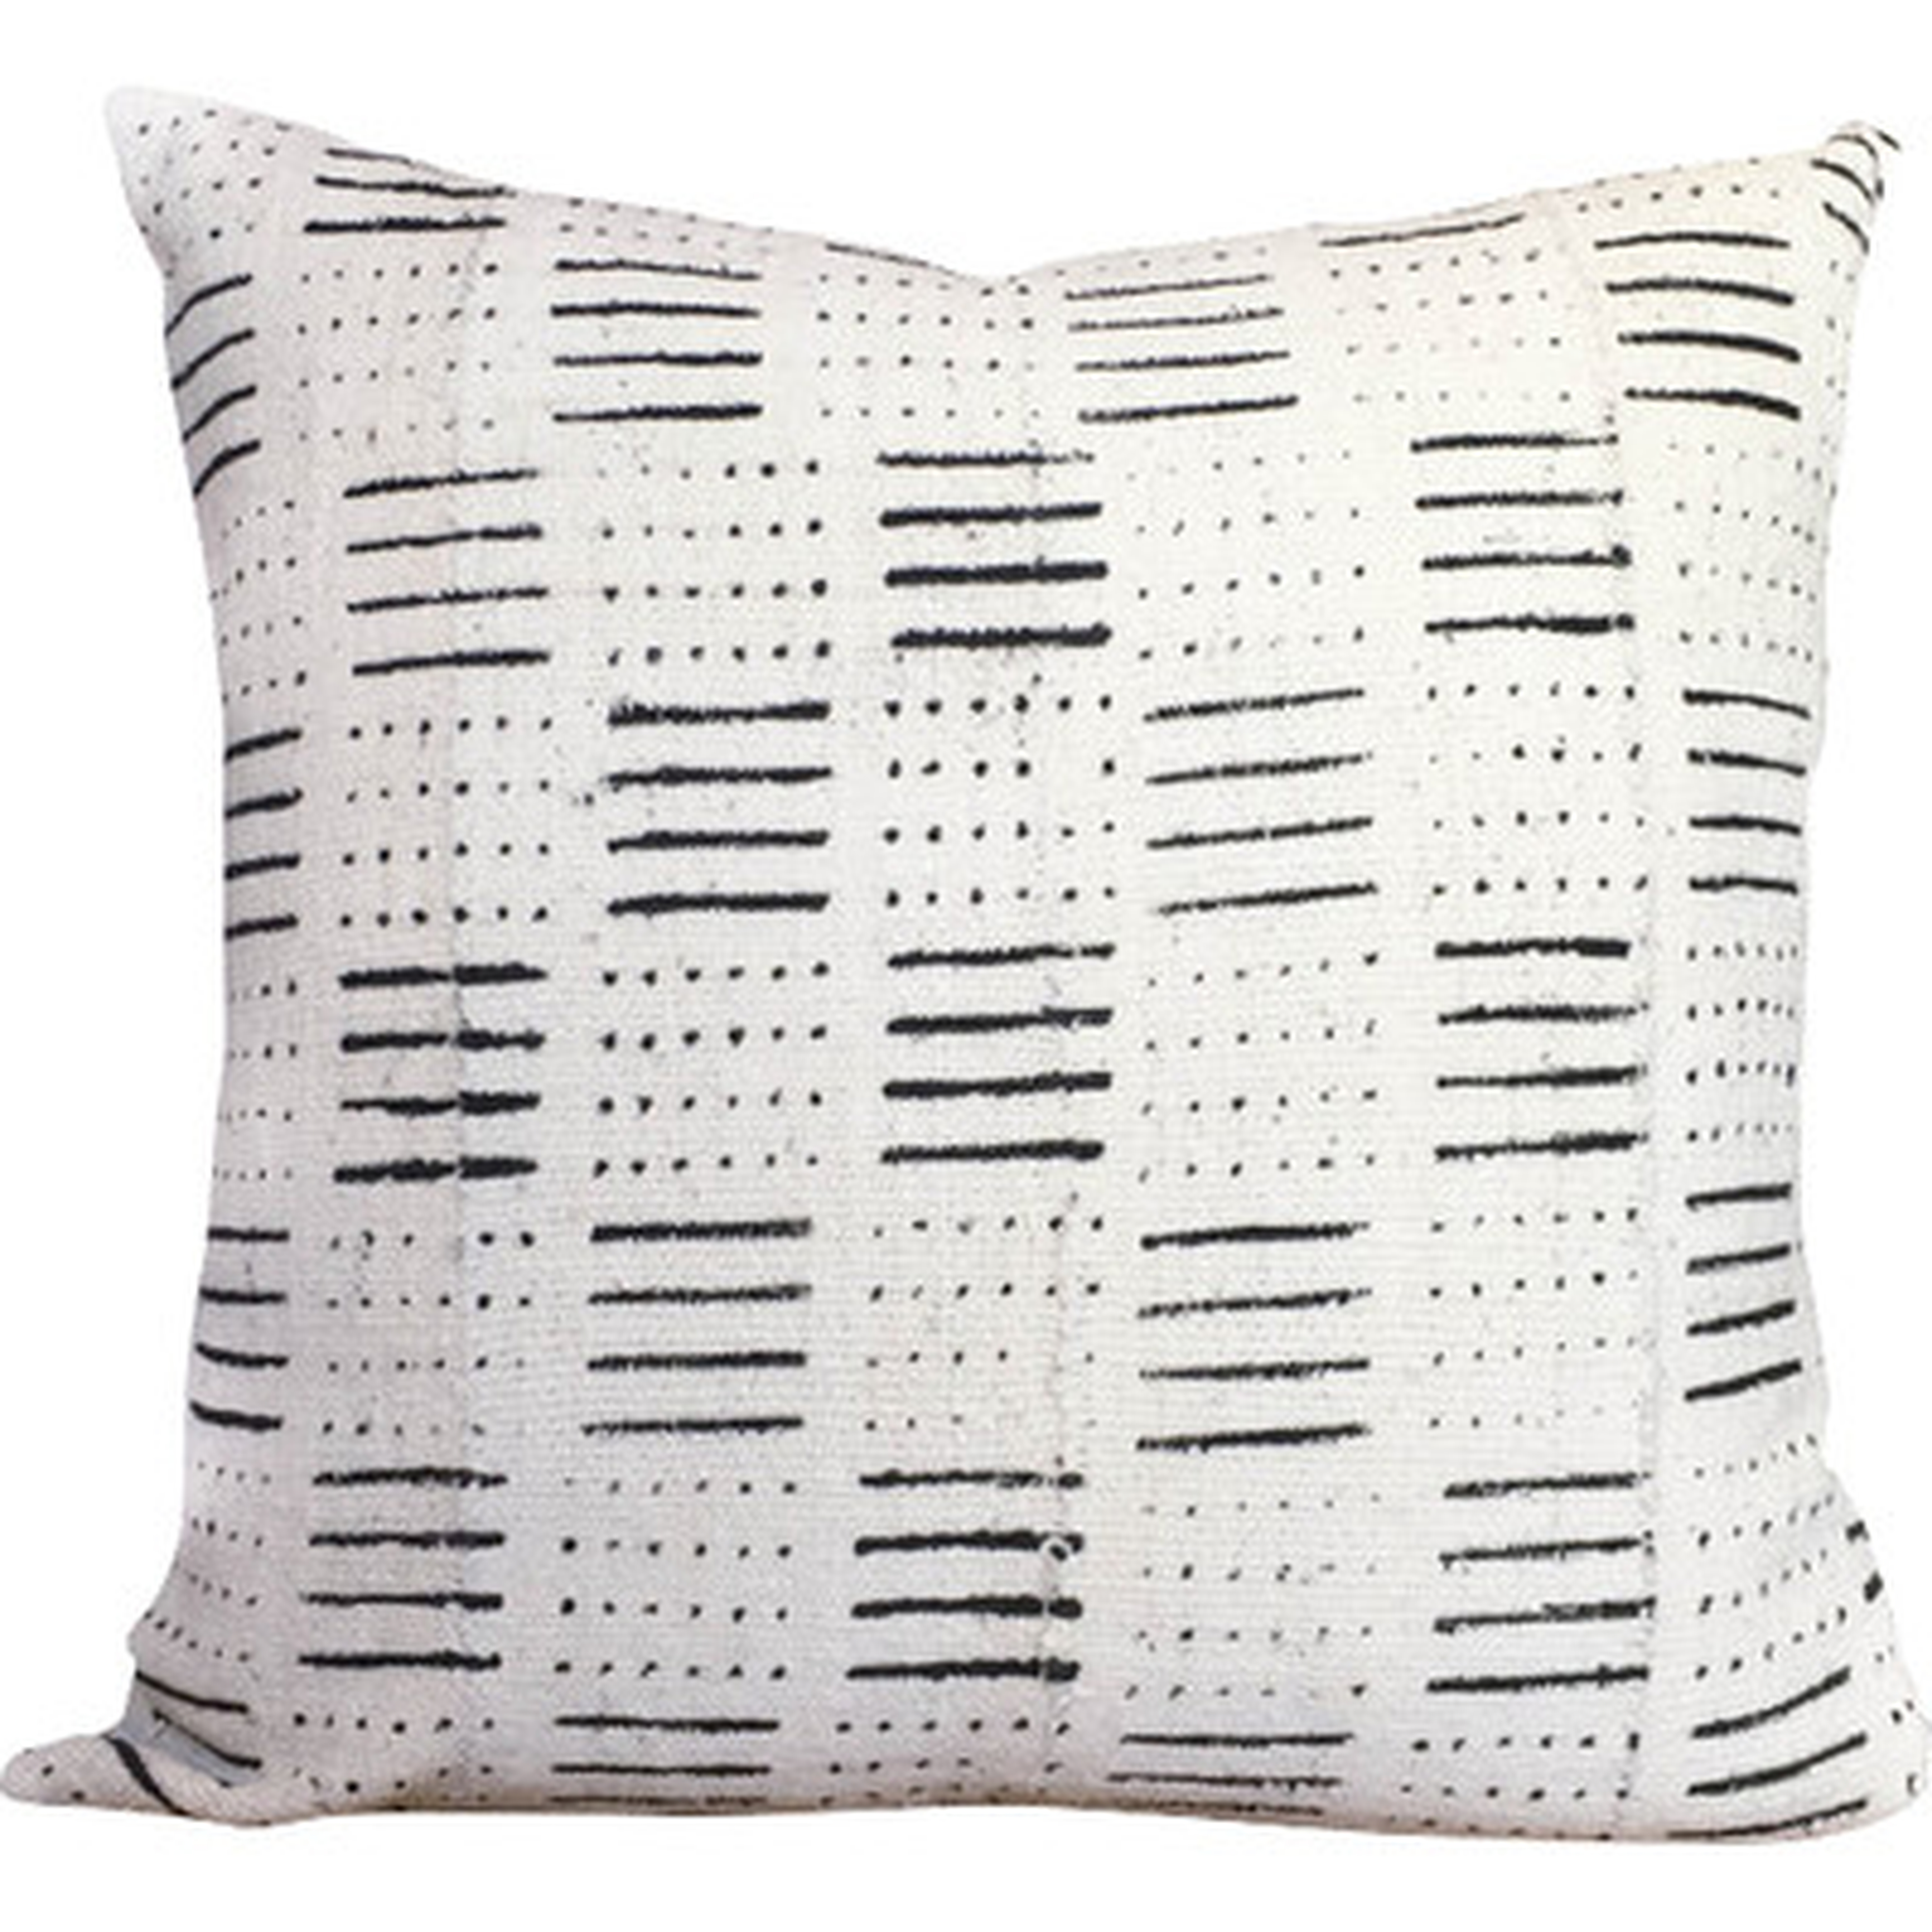 Dots and Dashes Print African Mud Cloth Pillow Cover - No insert - Wayfair